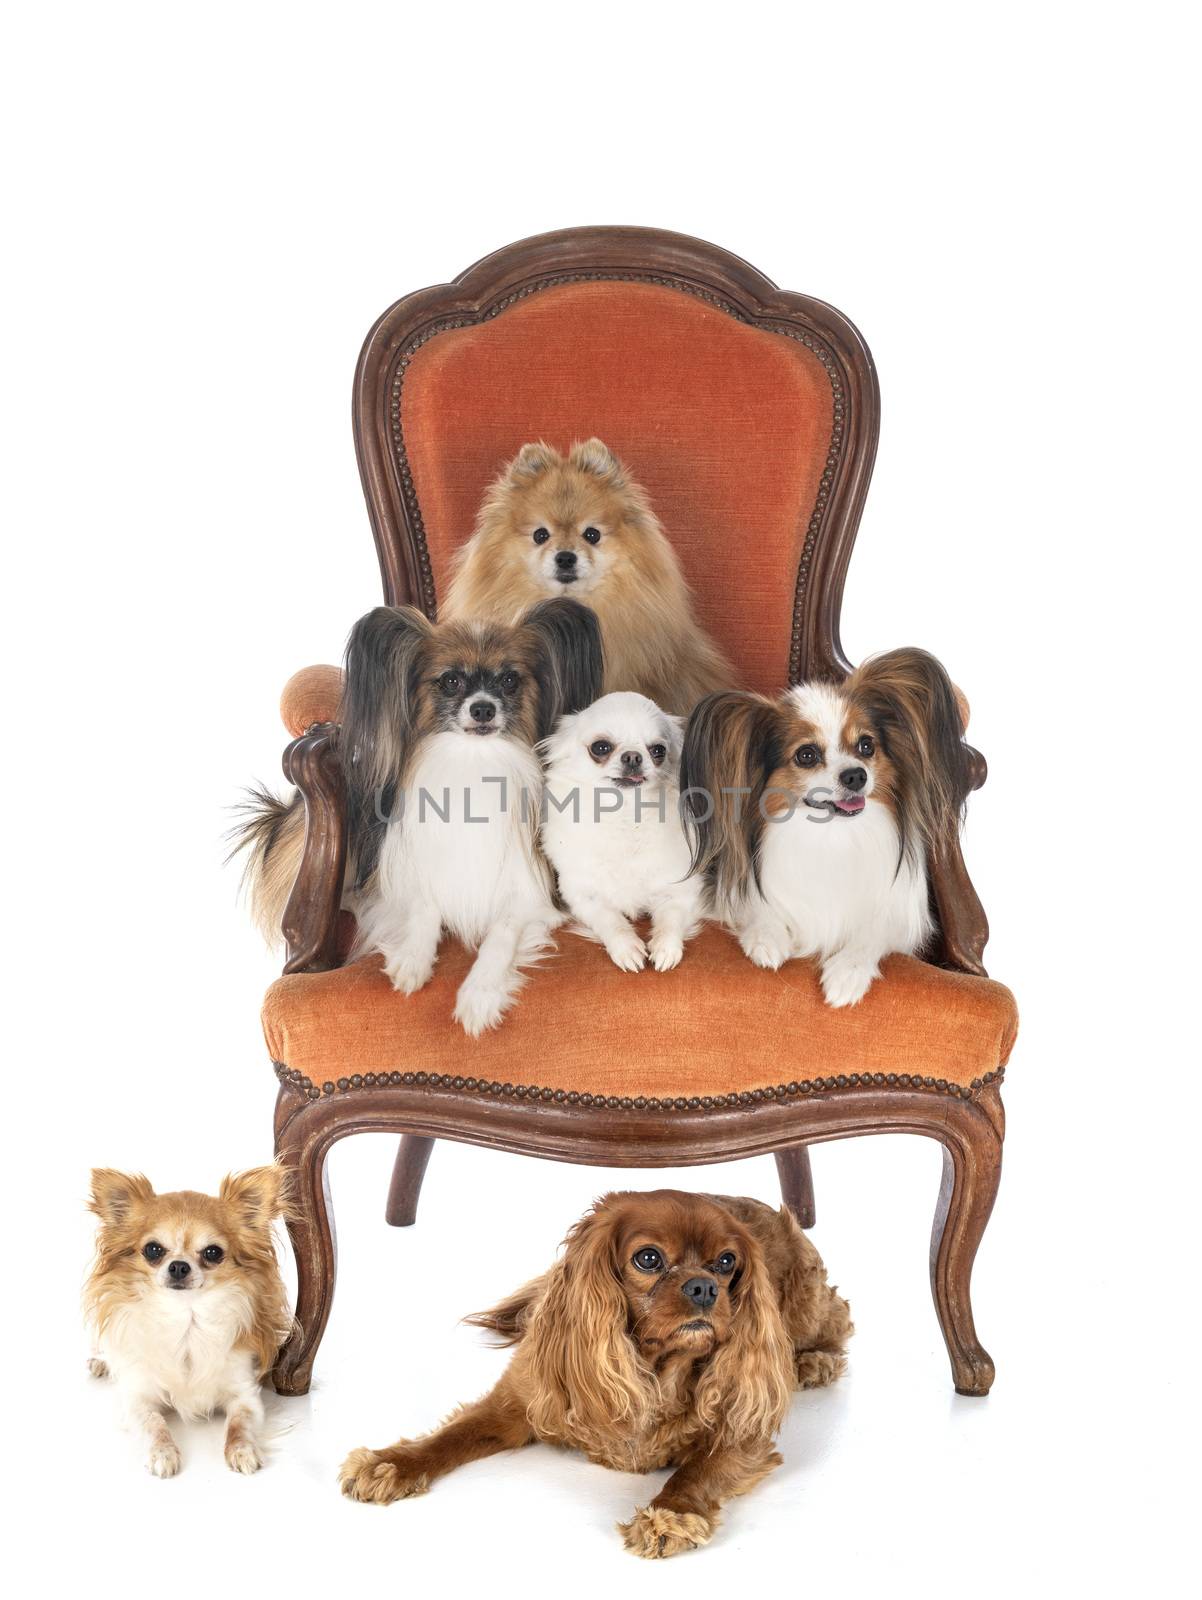 little dogs on chair in front of white background